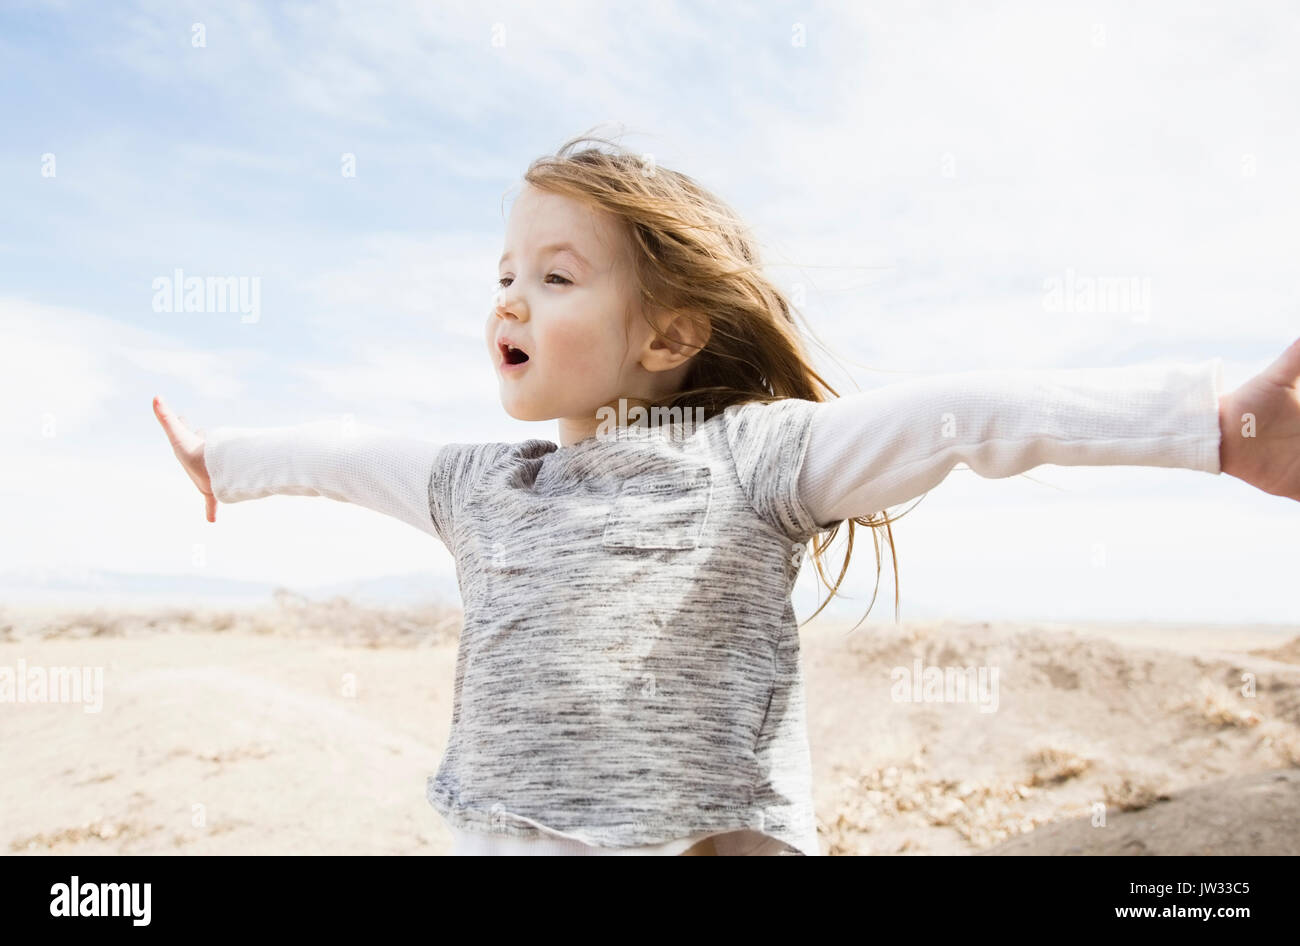 Portrait of little girl (4-5) with outstretched arms and open mouth in field Stock Photo